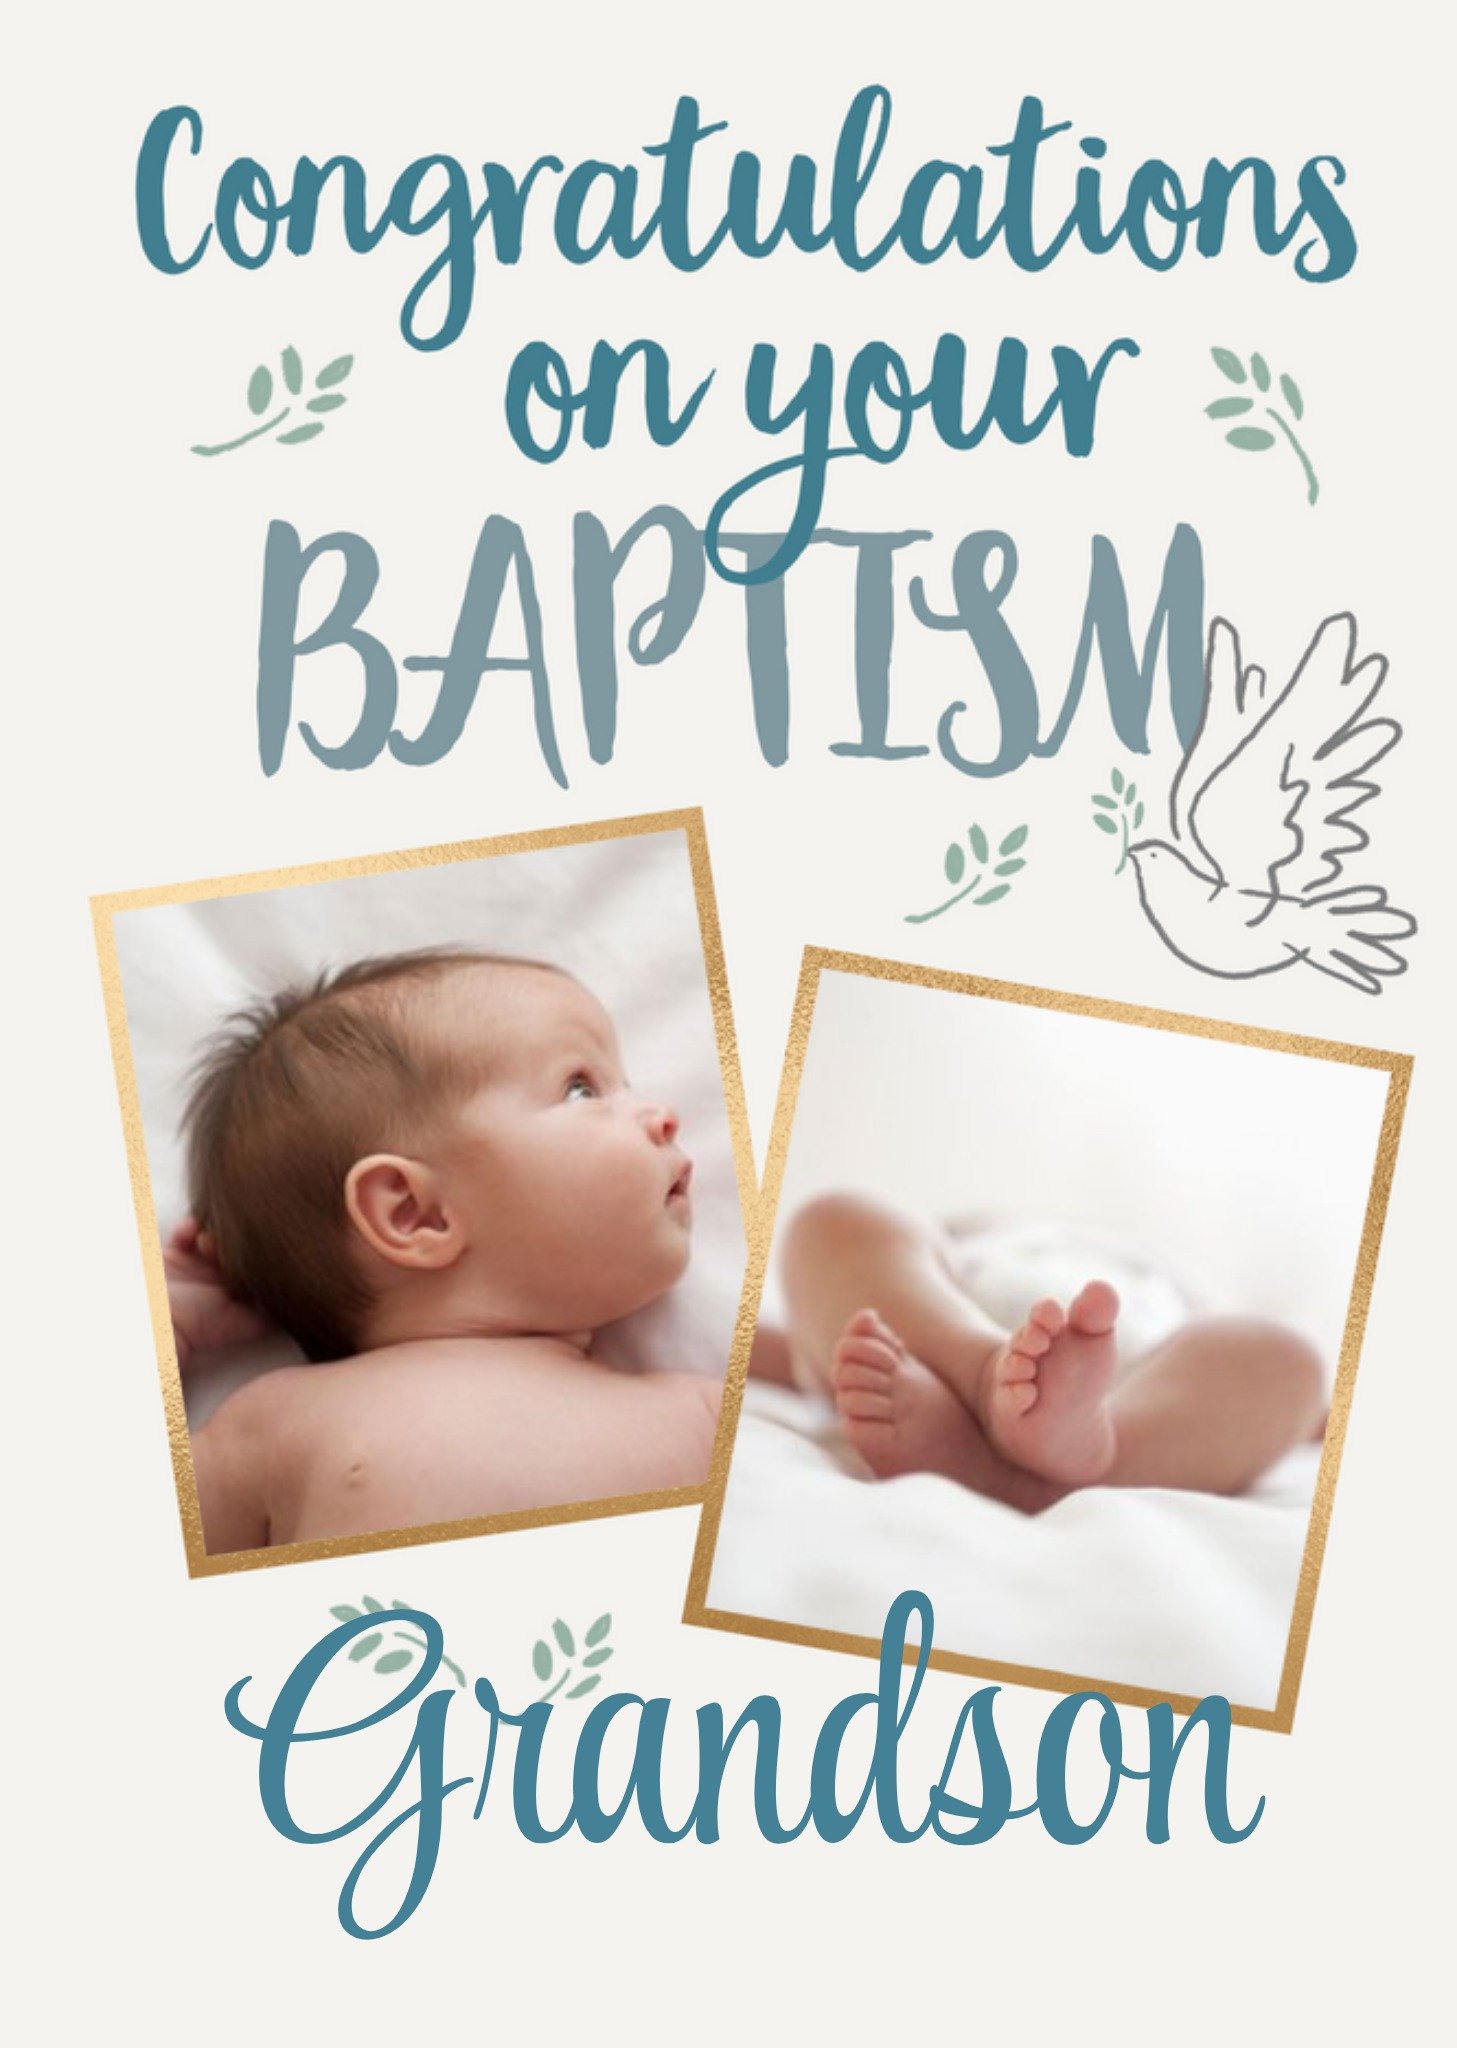 Moonpig Typographic Photo Upload Congratulations On Your Baptism Grandson Card, Large